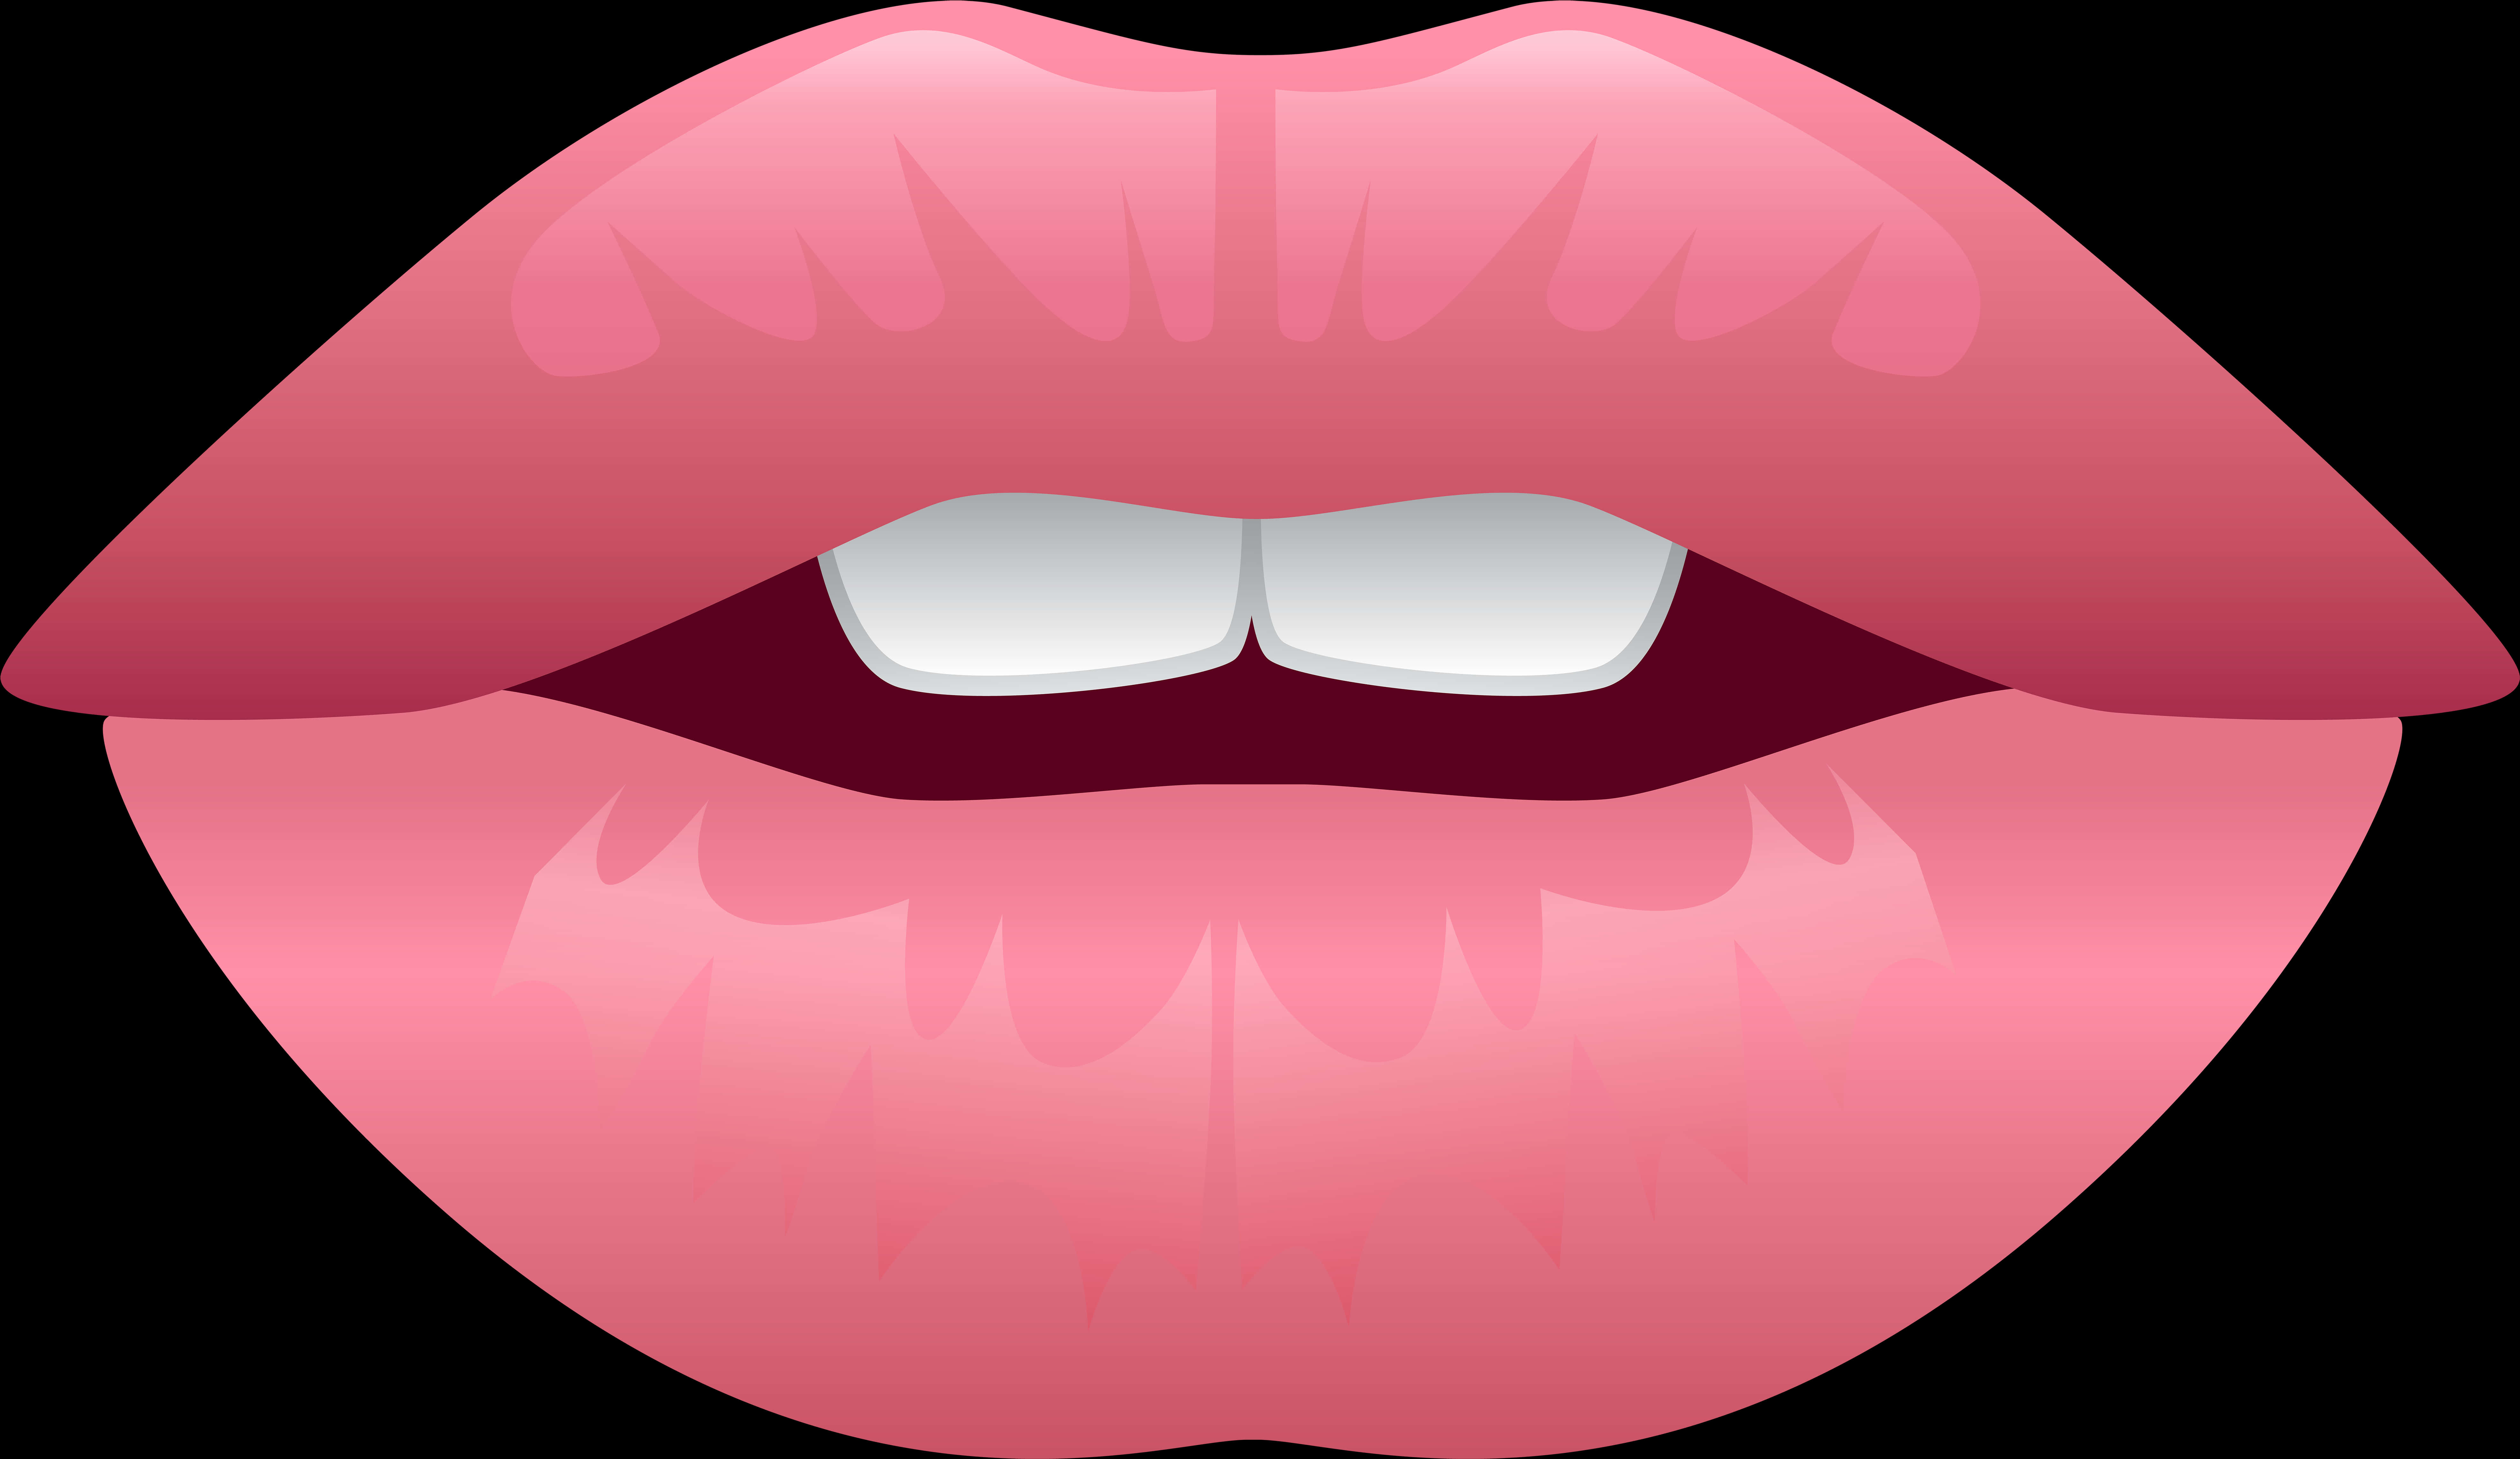 Glossy Pink Lips Vector Illustration PNG image